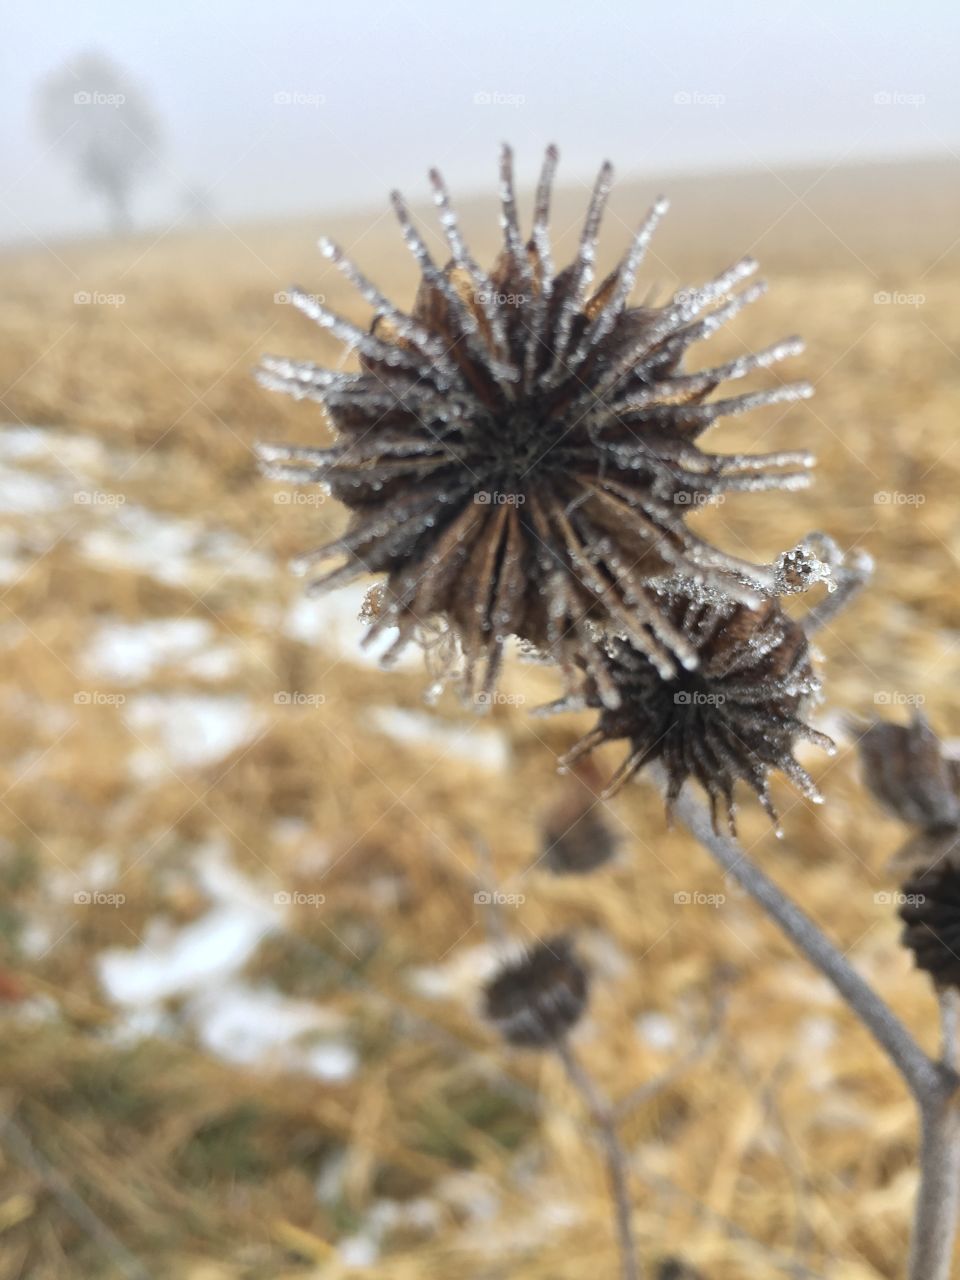 Ice coating on a dried sunflower head, harvested cornfield in blurred rural background